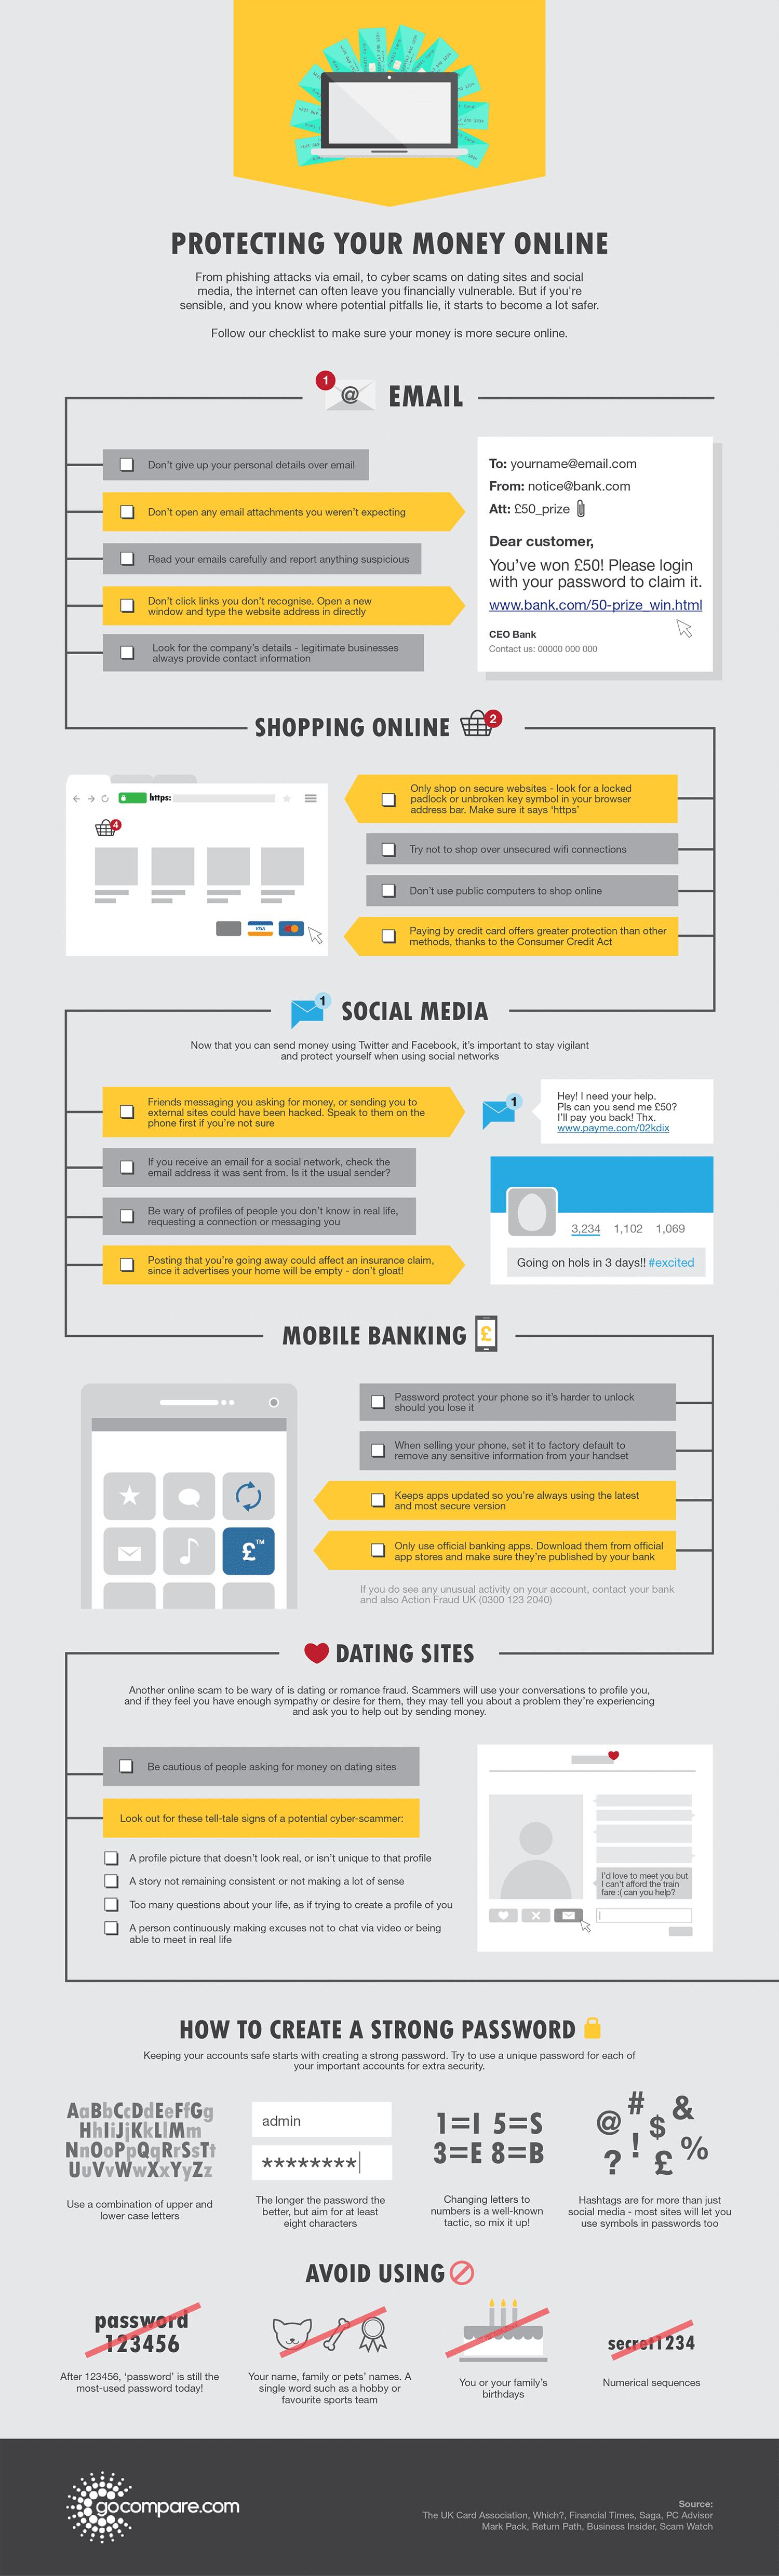 Protecting Your Money Online - #infographic